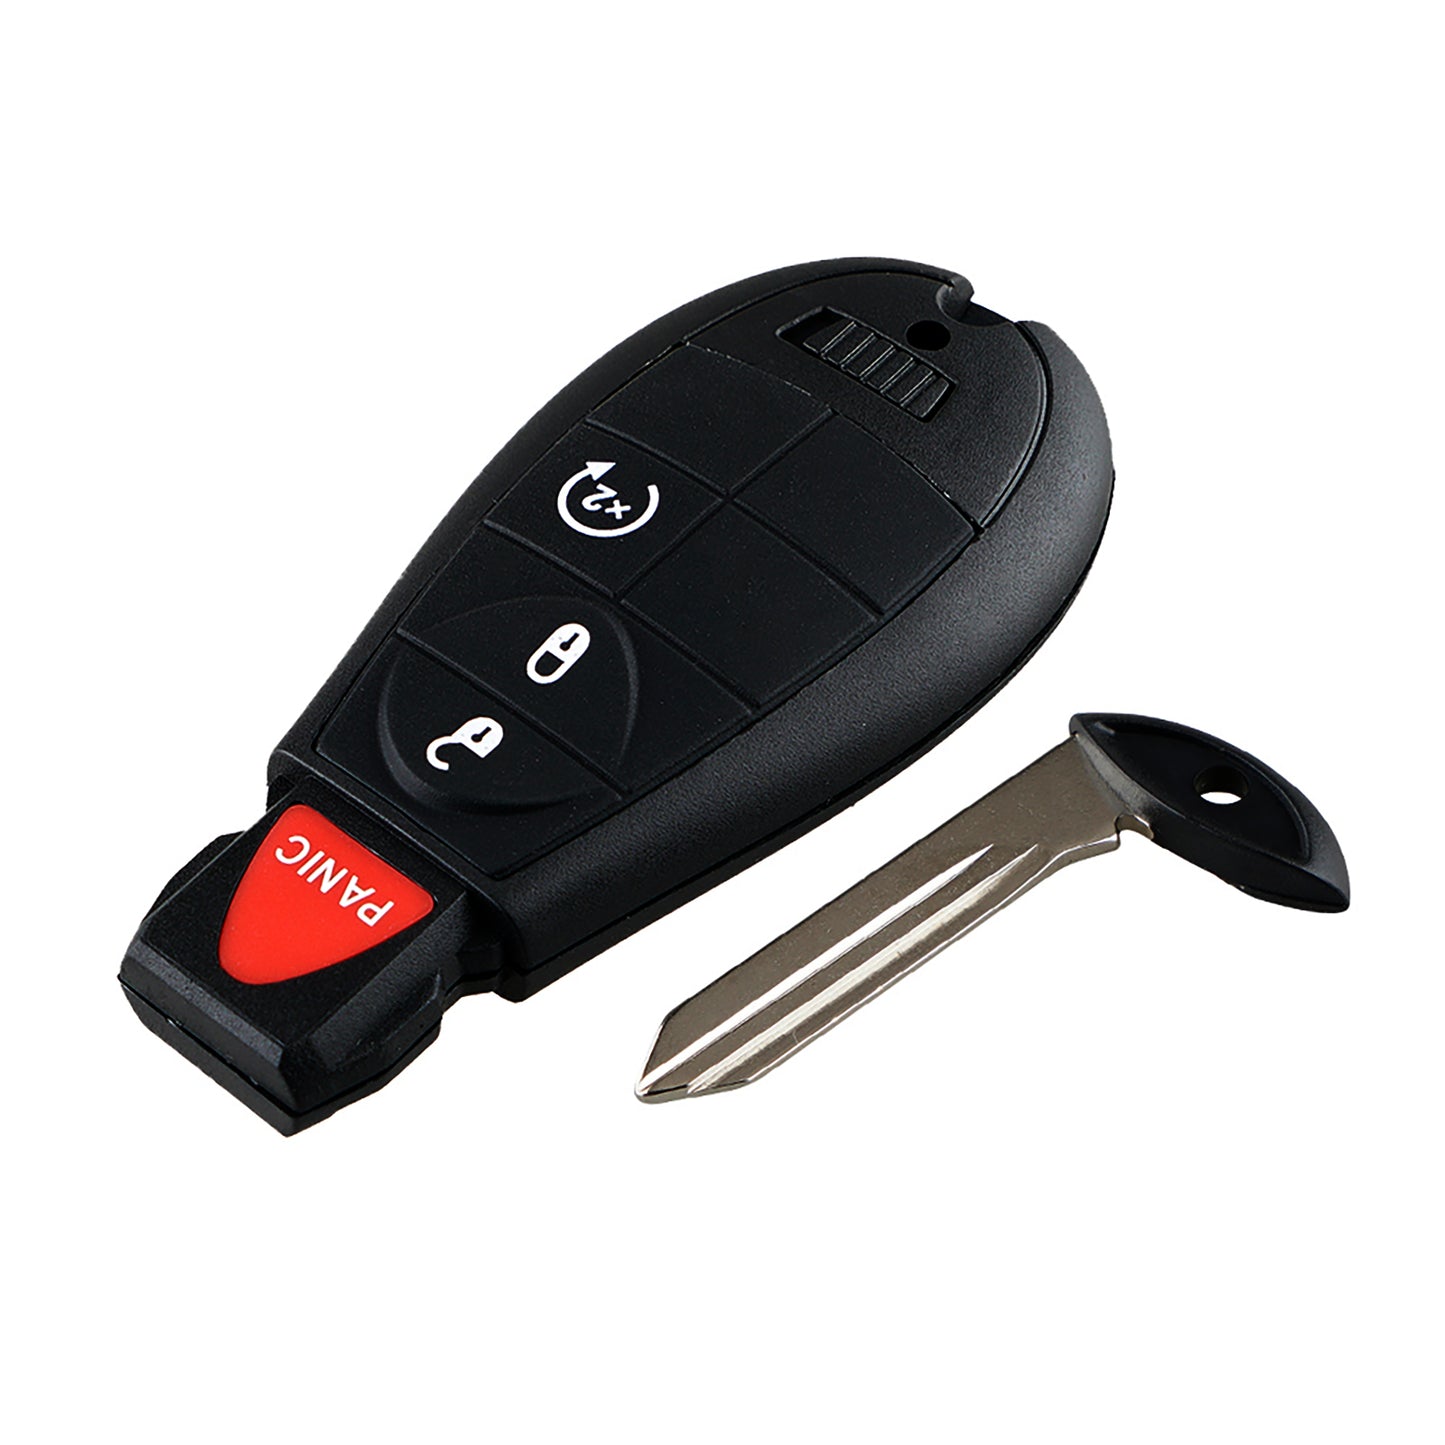 4 Buttons 433MHz 7961 Chip Keyless Entry Fob Remote Key for 2013 - 2019 Dodge Ram 1500 Classic FCC ID:GQ4-53T  68105083 SKU:J088